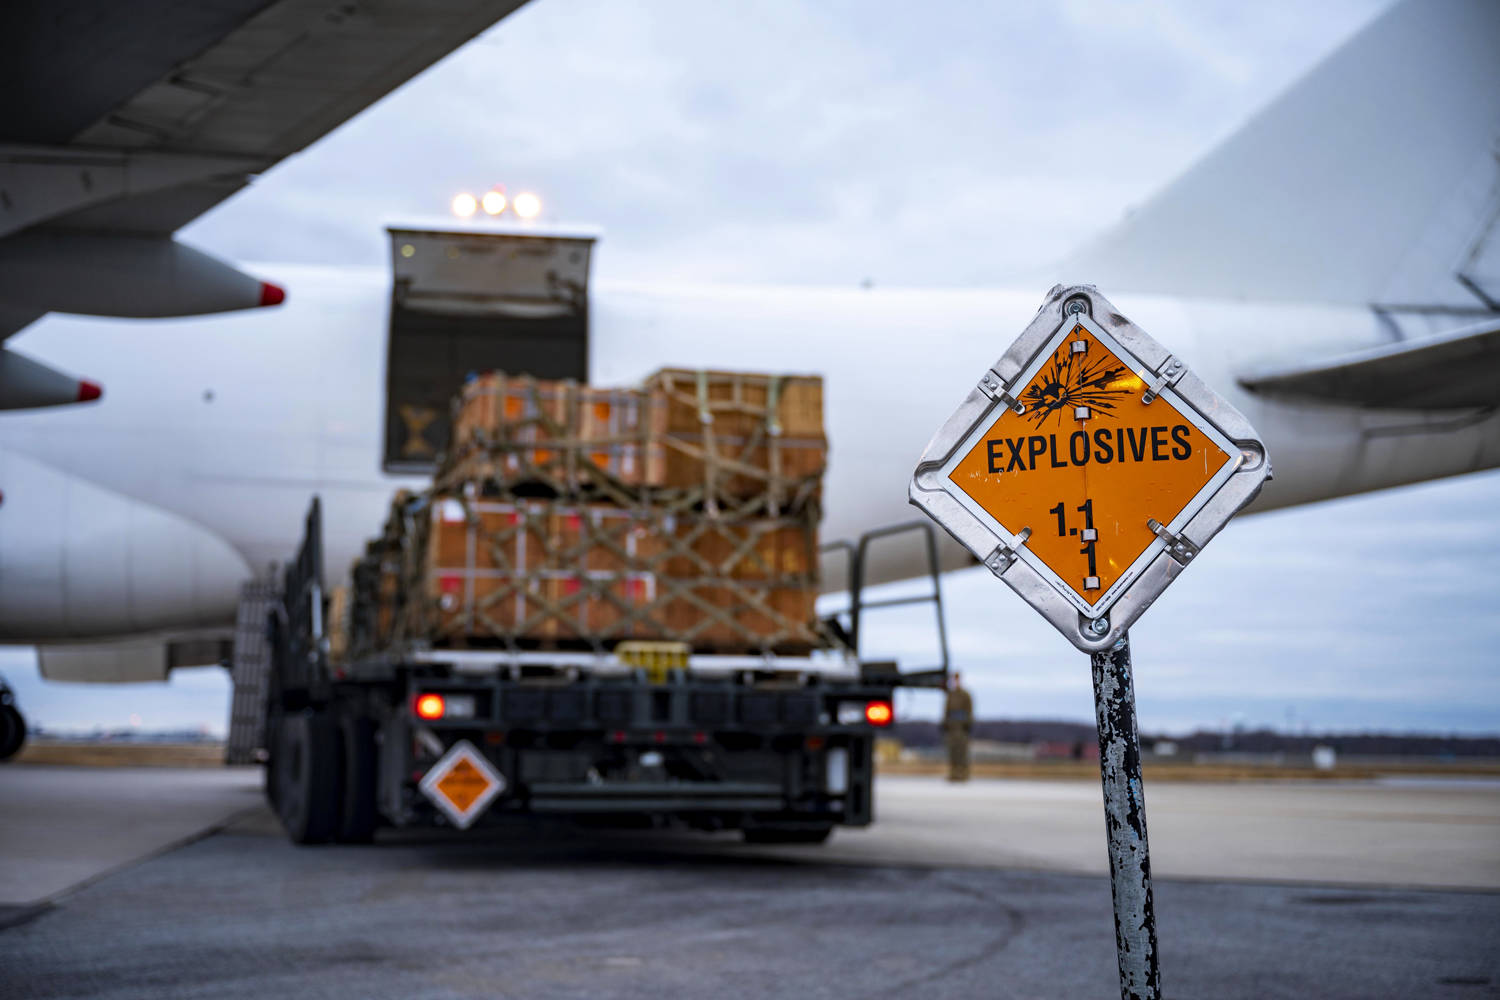 An explosives sign marks the cordon around a commercial aircraft during a security assistance mission at Dover Air Force Base, Del., Jan. 13, 2023. The United States has committed more than $24.5 billion in security assistance to Ukraine since the beginni.